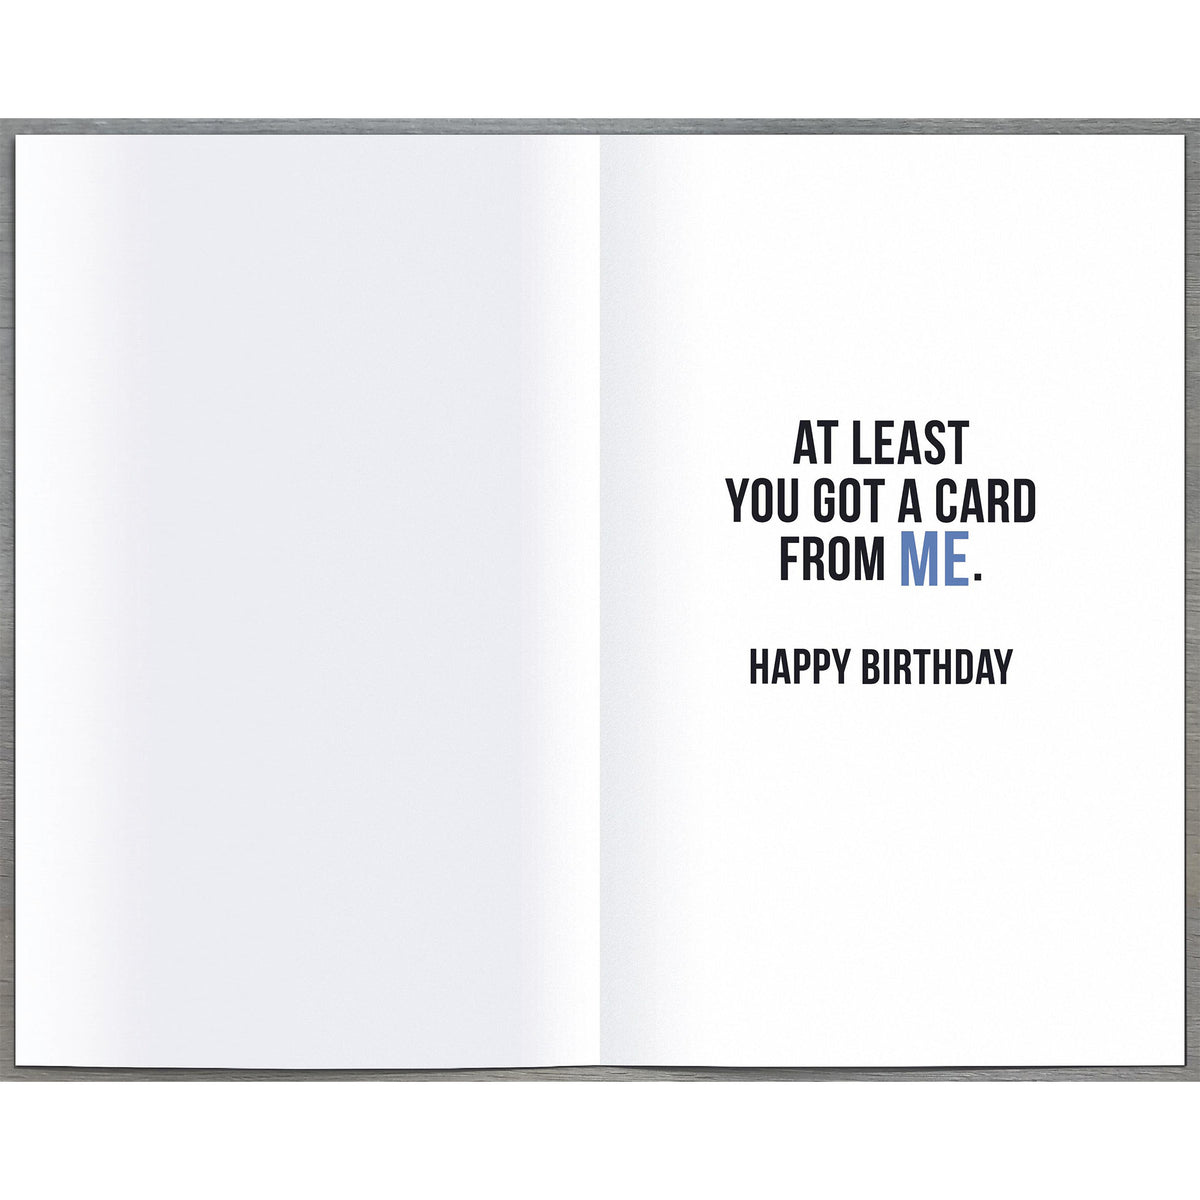 People Who Care Birthday Greetings Card